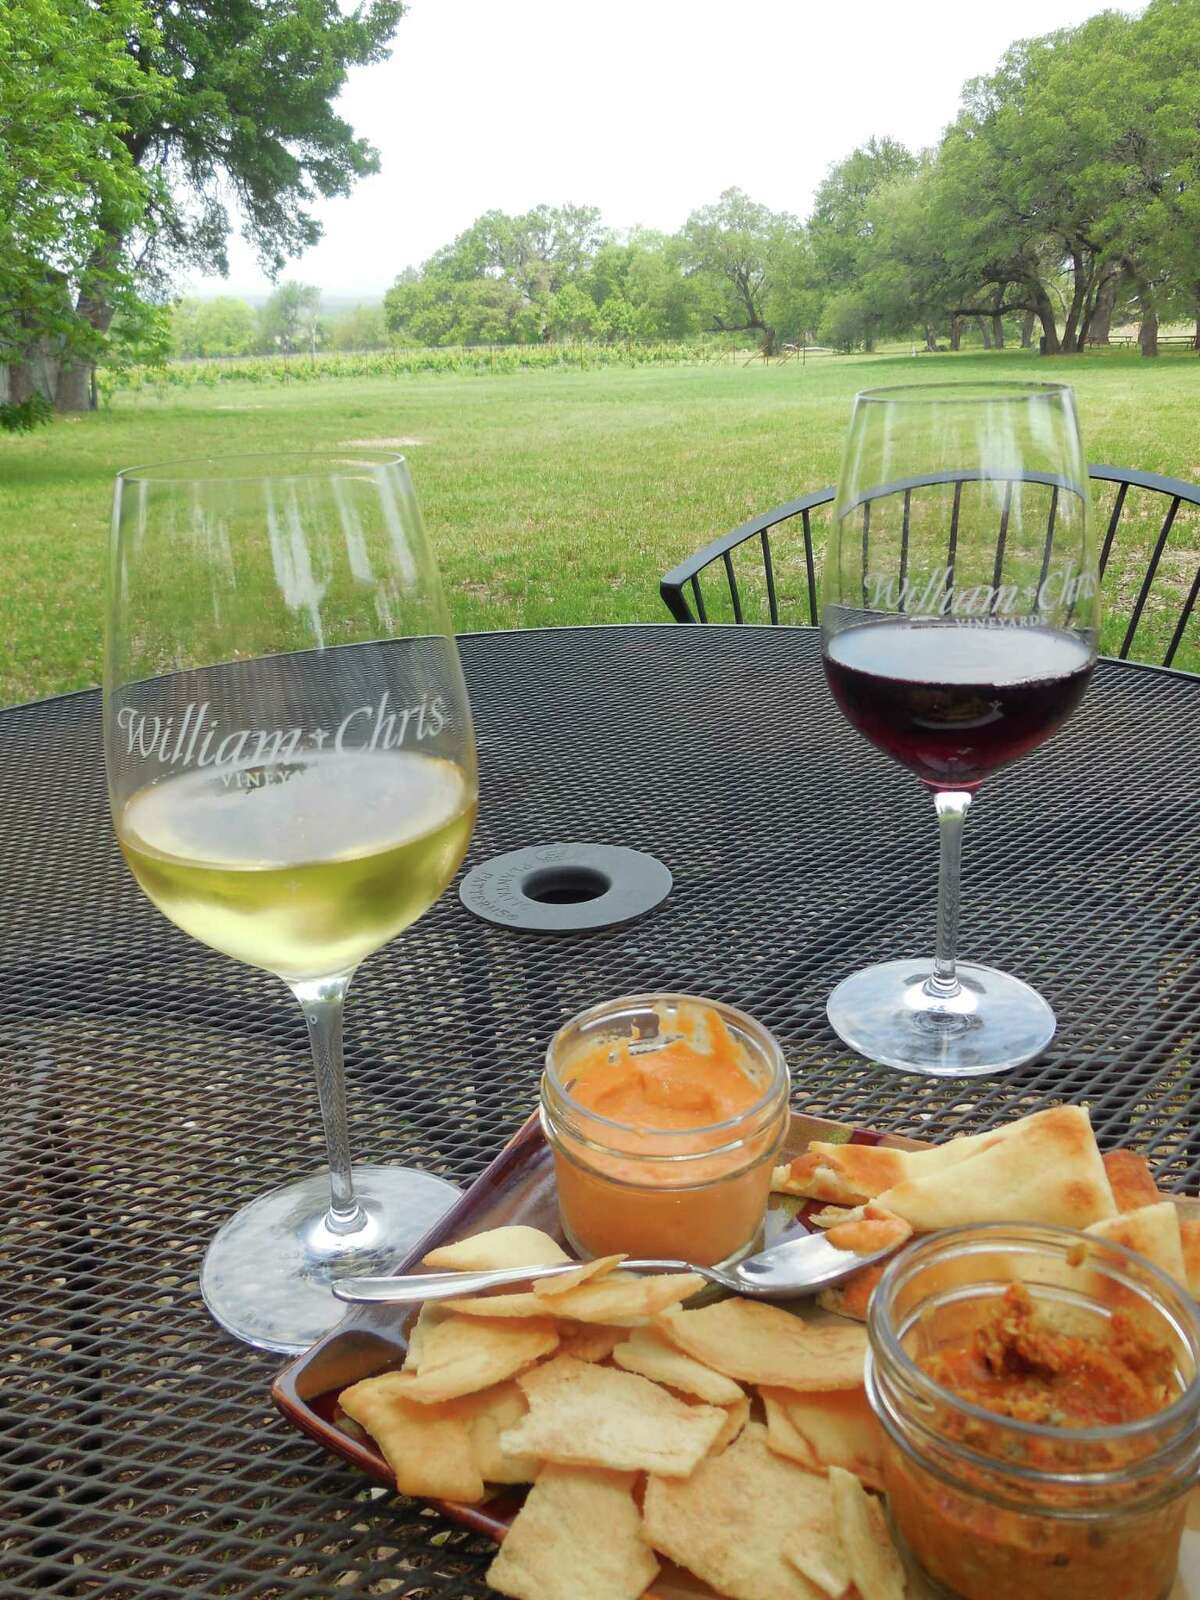 The William Chris Vineyard in Hye, Texas, is one of more than two dozen stops on Wine Road 290 east of Fredericksburg, making the area a competitor to the Napa Valley for wine lovers. Take a few bottles home, rent a limo tour, or just grab a couple of glasses to enjoy on the property's picnic tables with the vineyards in the distance.   Mandatory Credit: Miguel Lecuona, Hill Country Light Photography